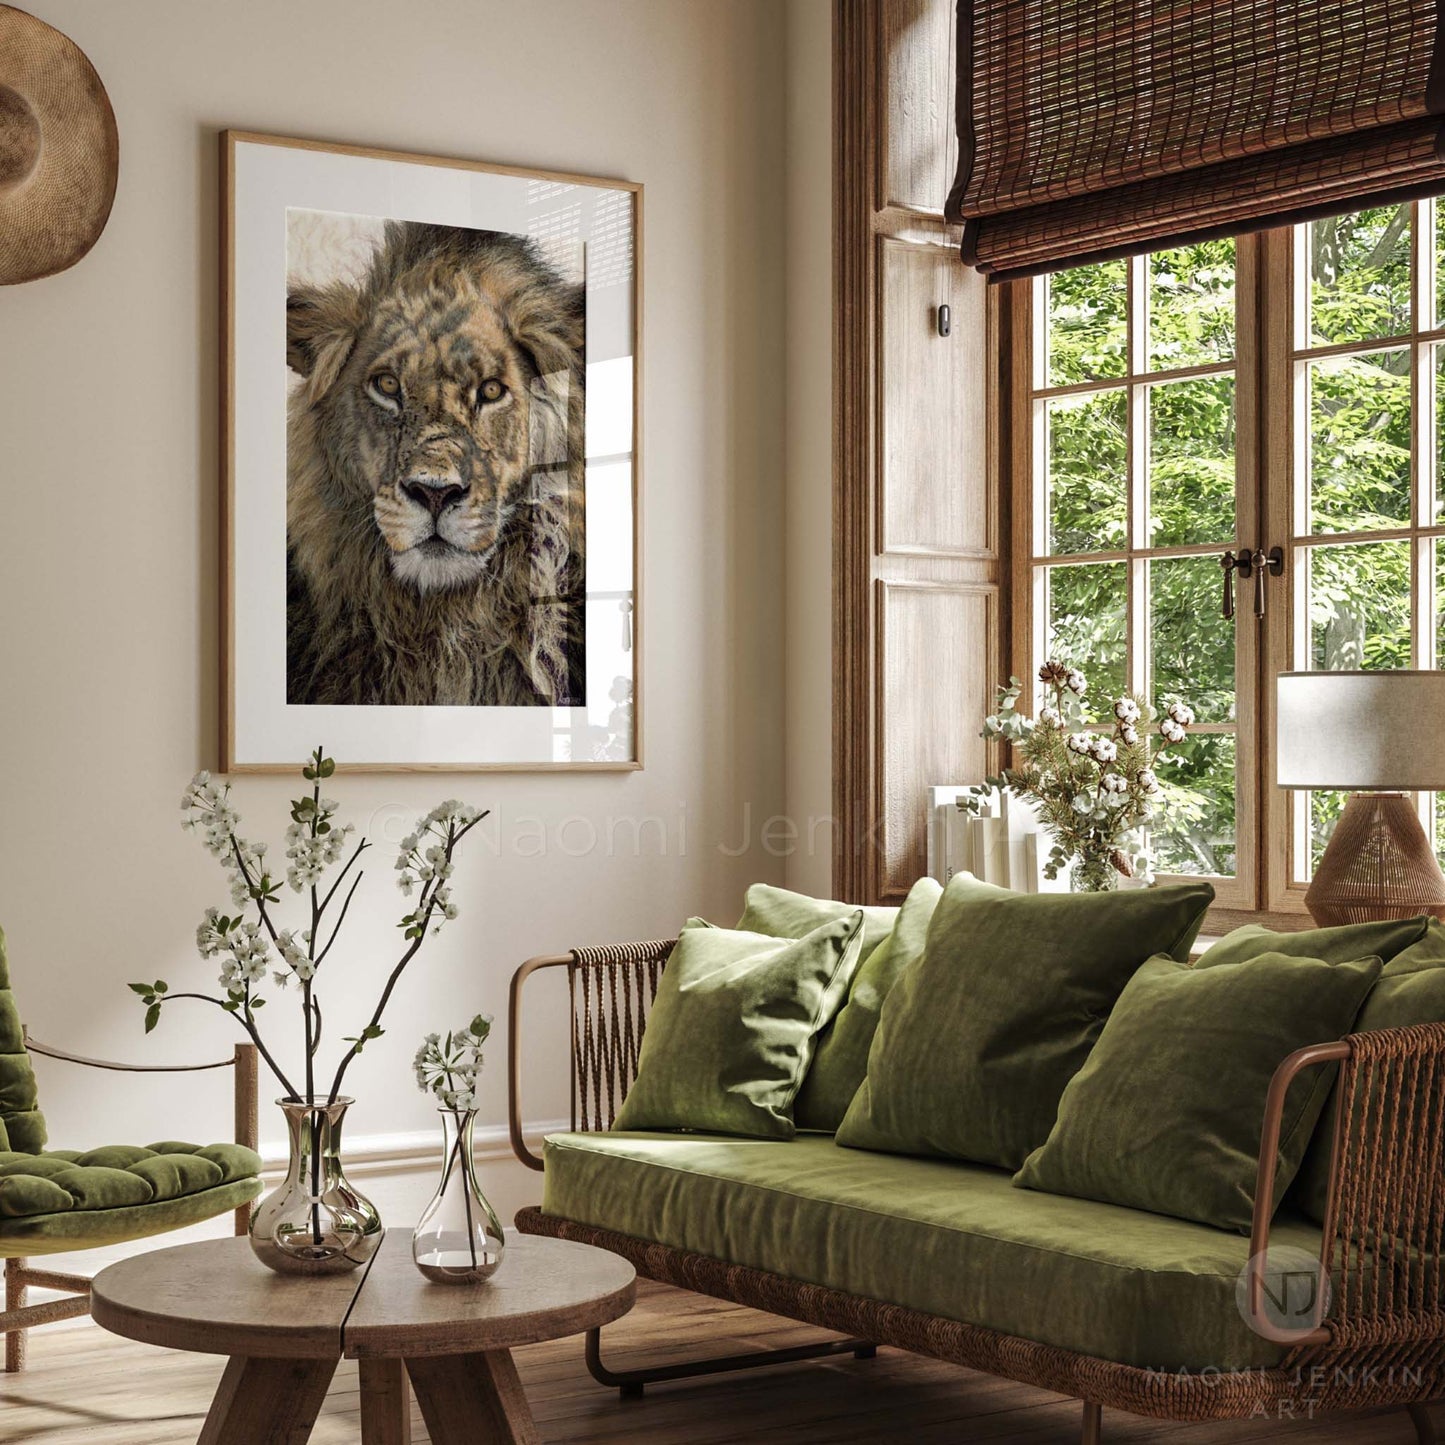 Framed giclée print of lion painting "Warrior" by Naomi Jenkin Art, displayed in a living room..